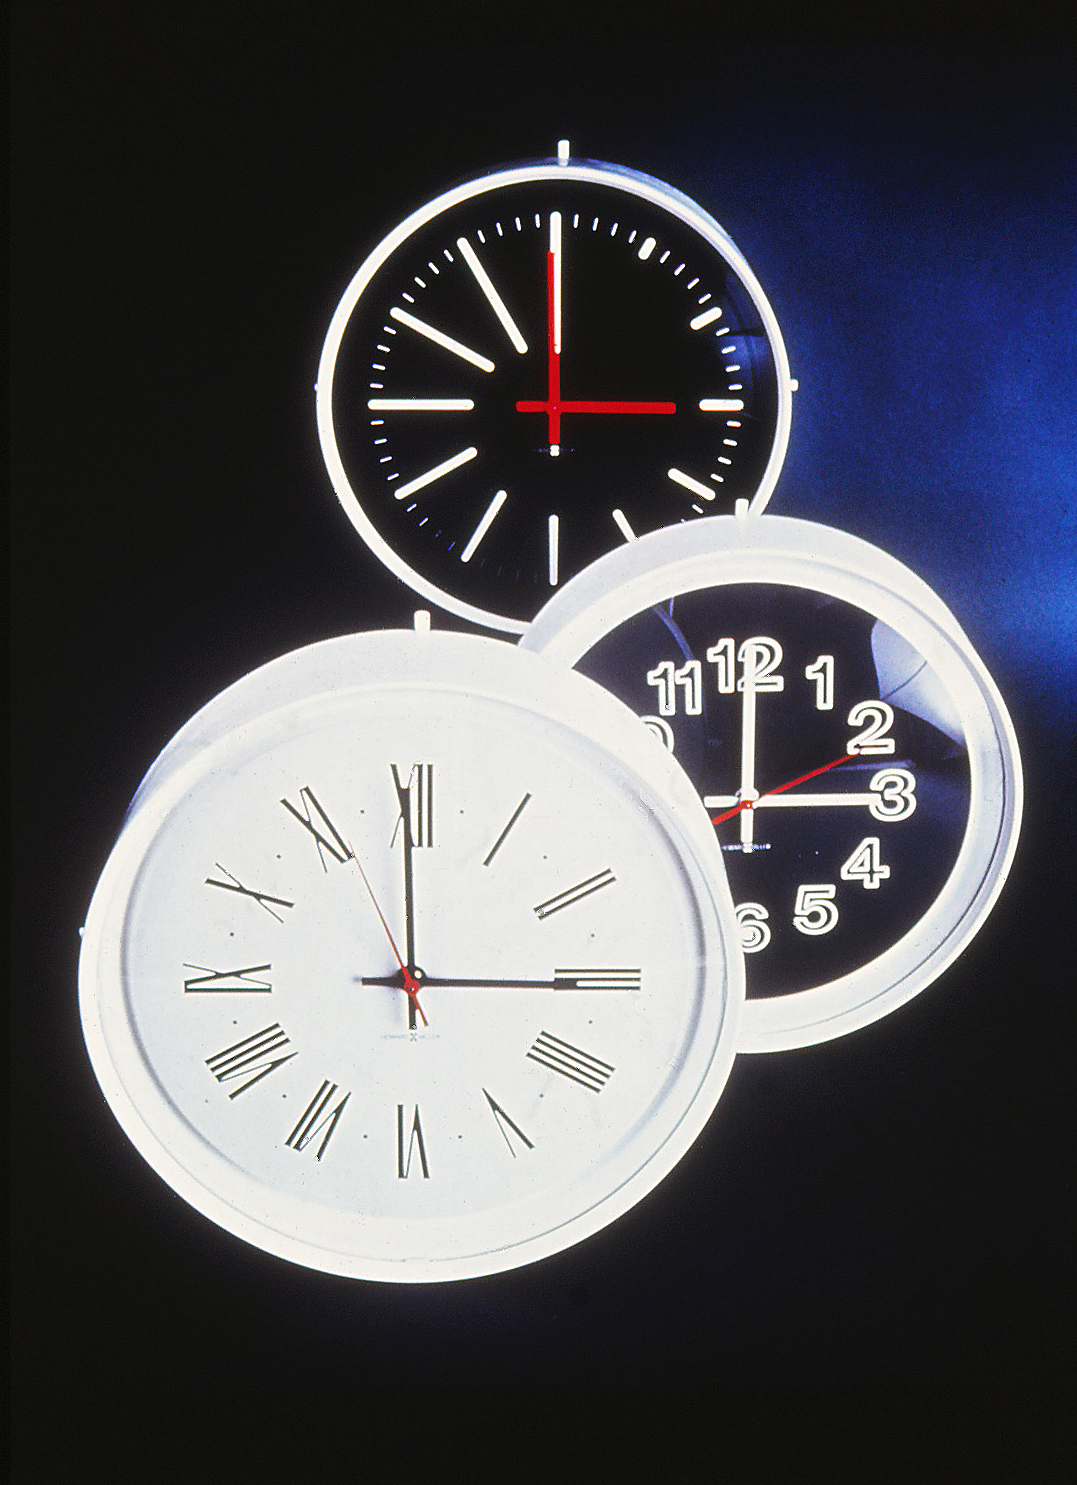 Three Institutional Clocks against a background.